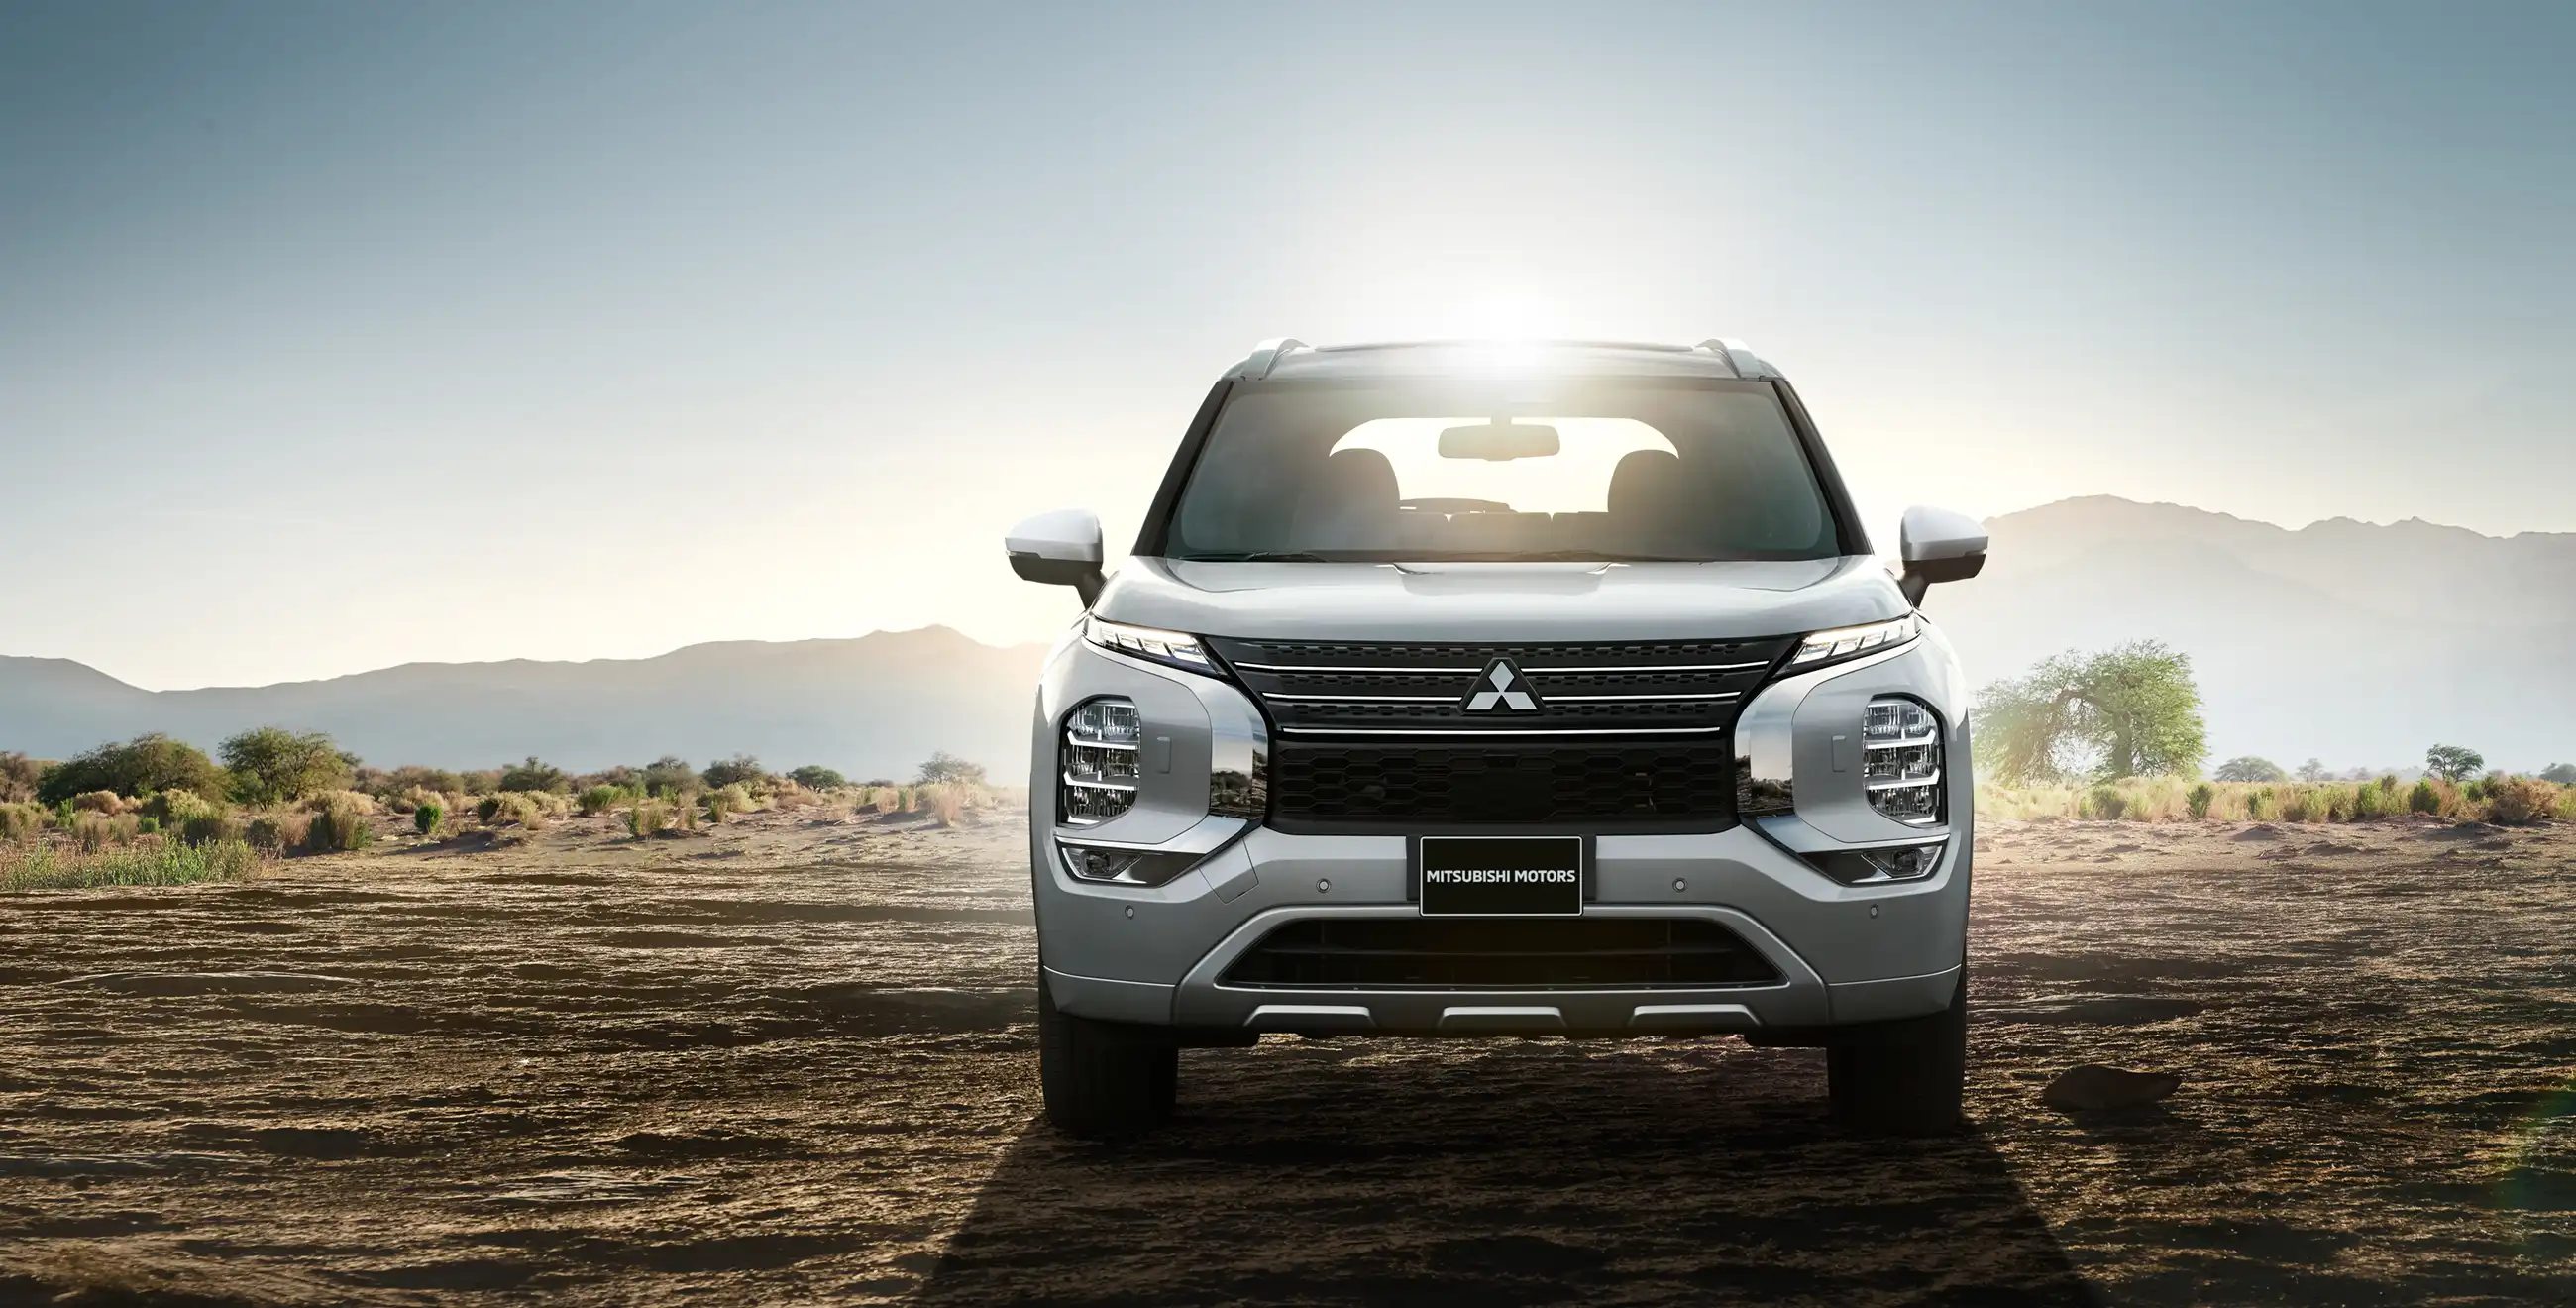 2023 Mitsubishi Outlander PHEV in the desert with mountains behind it